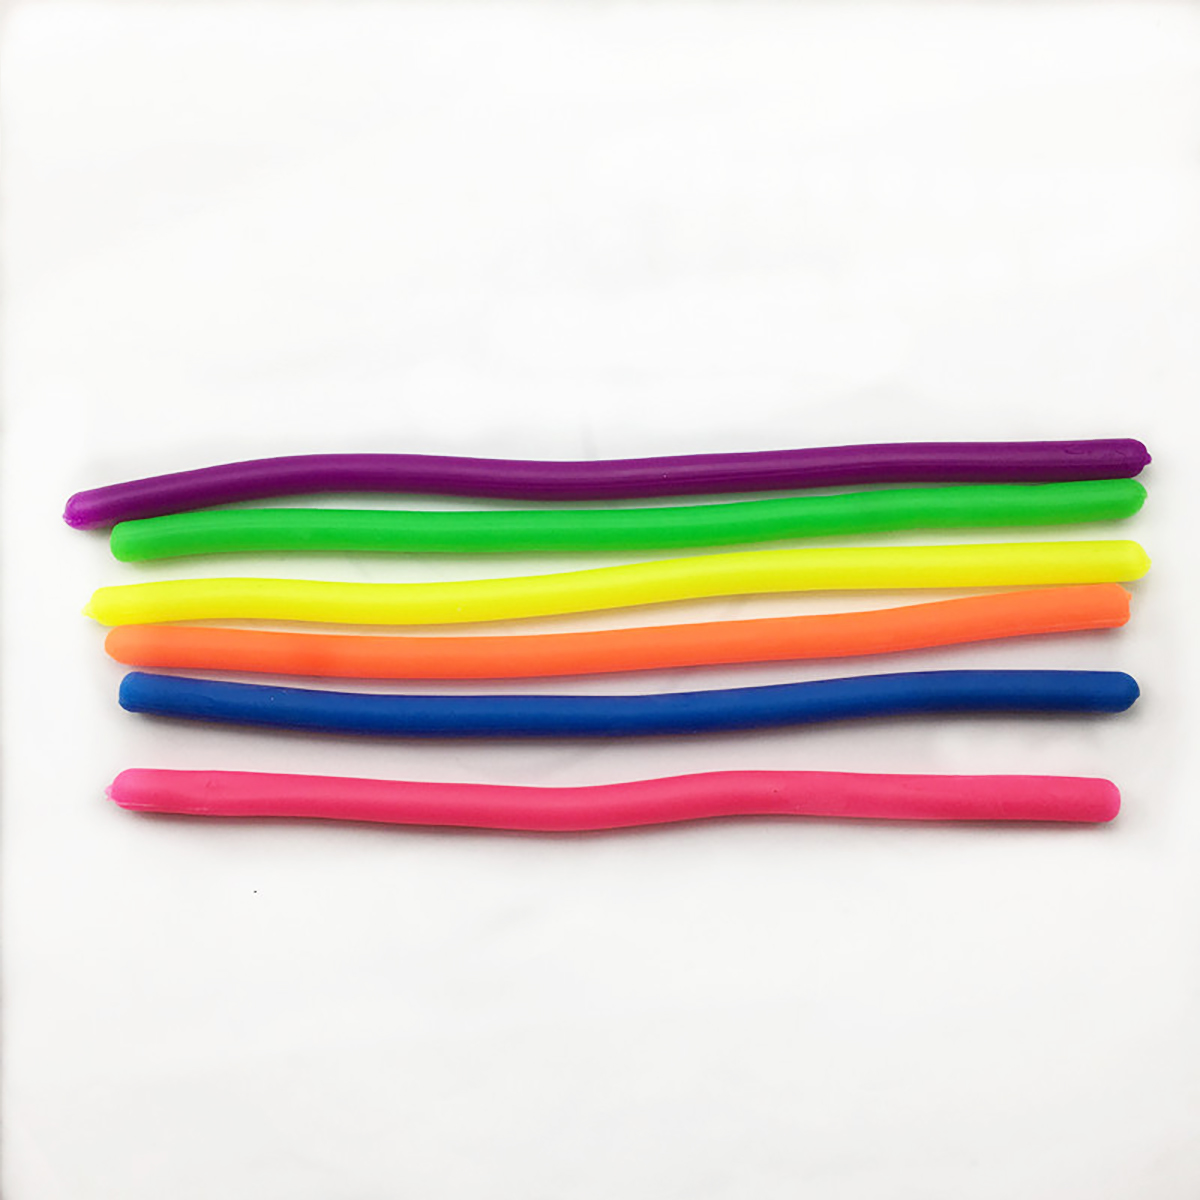 6Pcs-TPR-Colorful-Stretchy-String-Fidget-Gadget-Anxiety-Relief-Reduce-Stress-Gadget-1160180-5